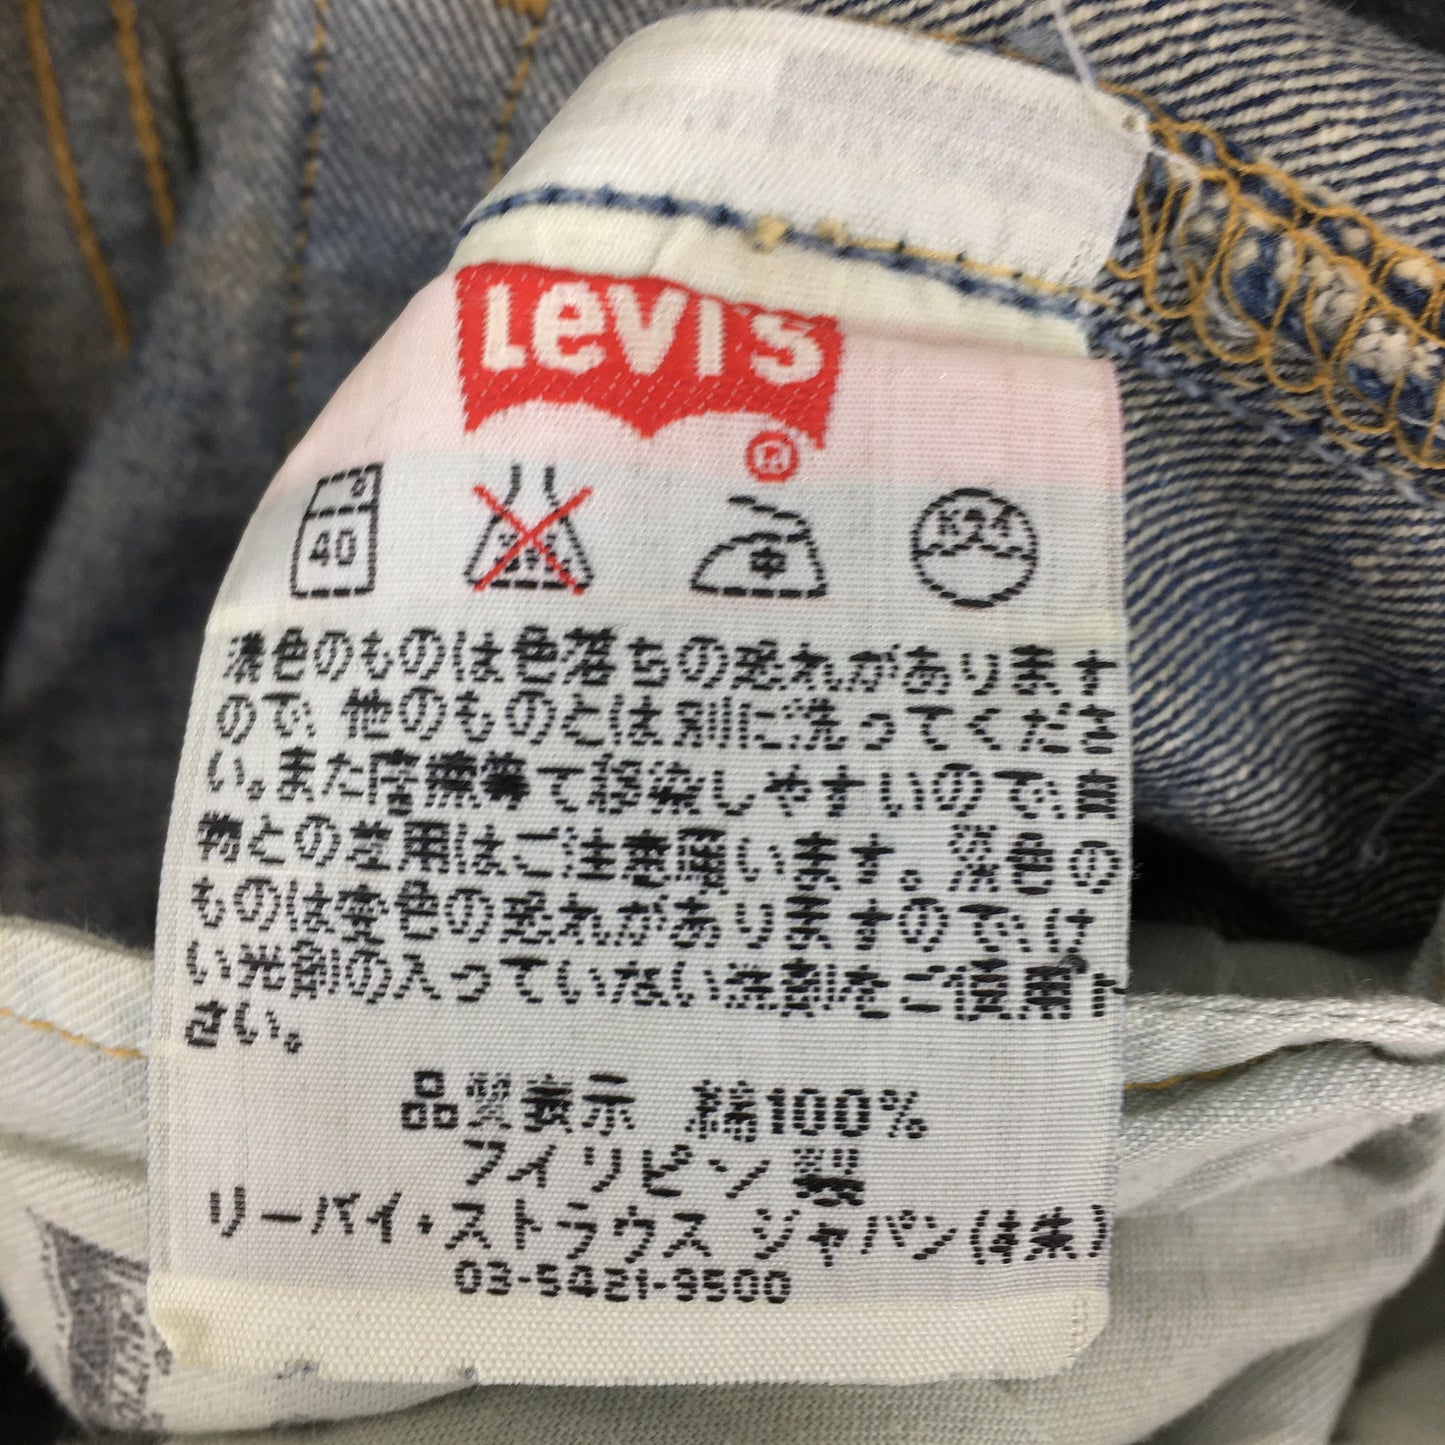 Levi's 501 Faded Blue Jeans Size 32x32